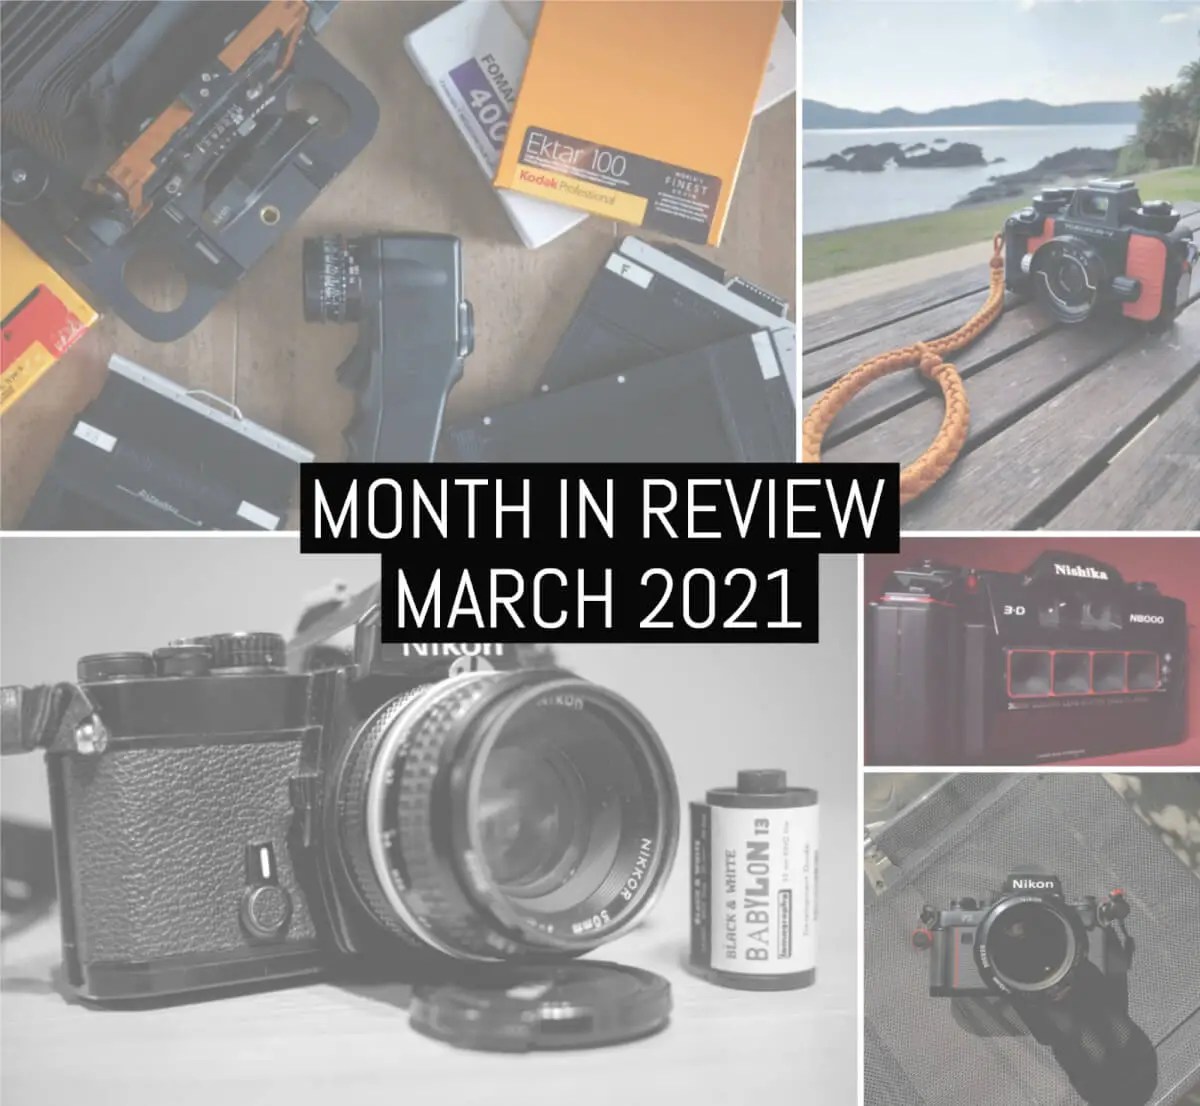 Month in review: March 2021